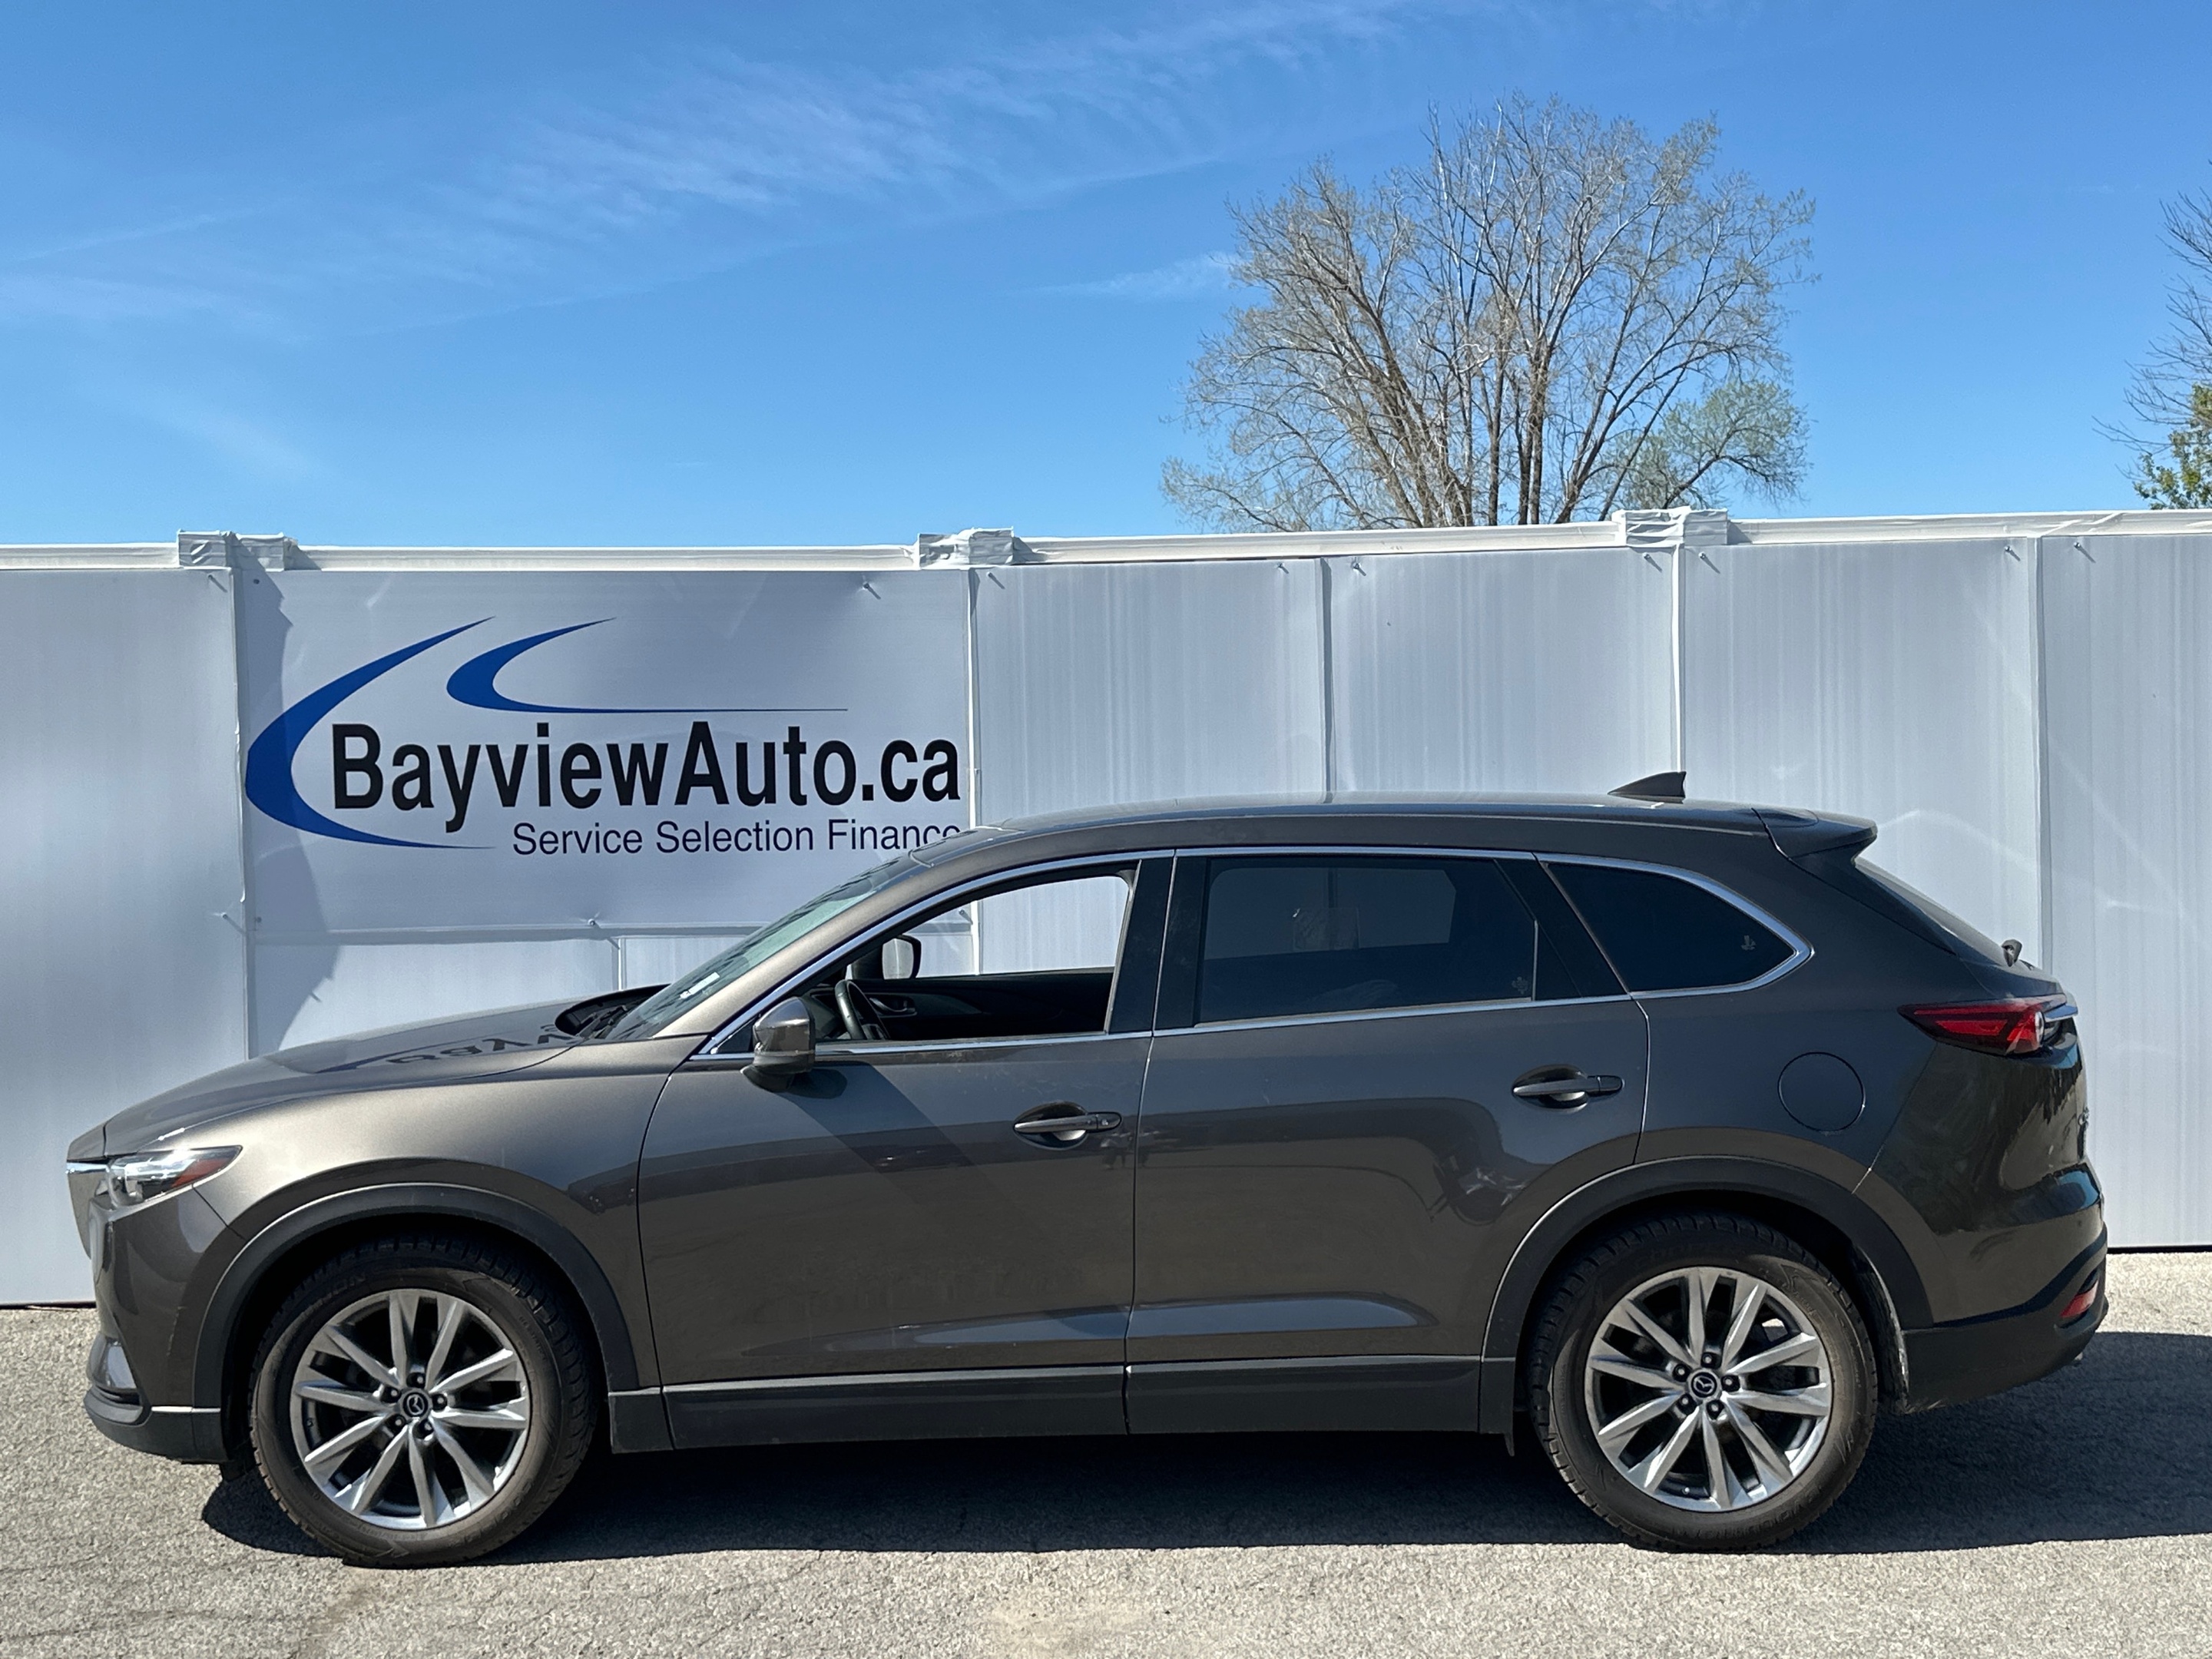 2019 Mazda CX-9 GS-L AWD! 7 PASS LEATHER, ROOF! OFF 1 OWNER LEASE!